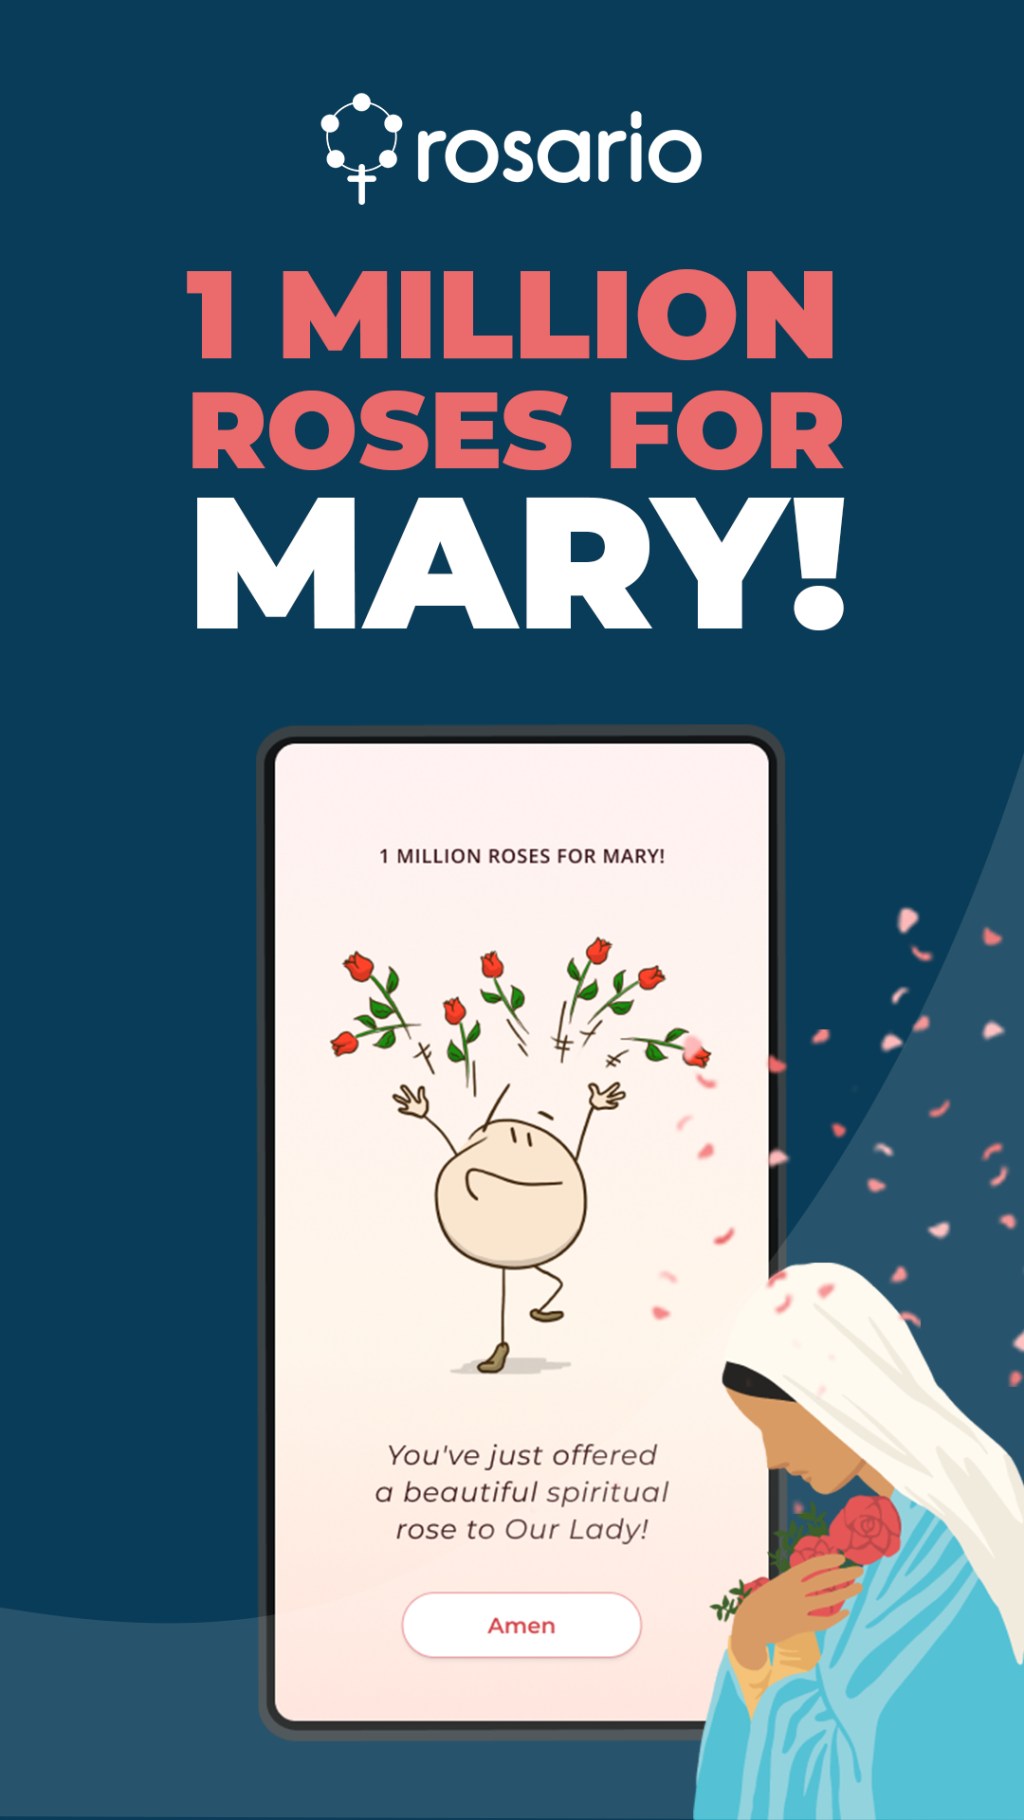 1 million roses for Mary